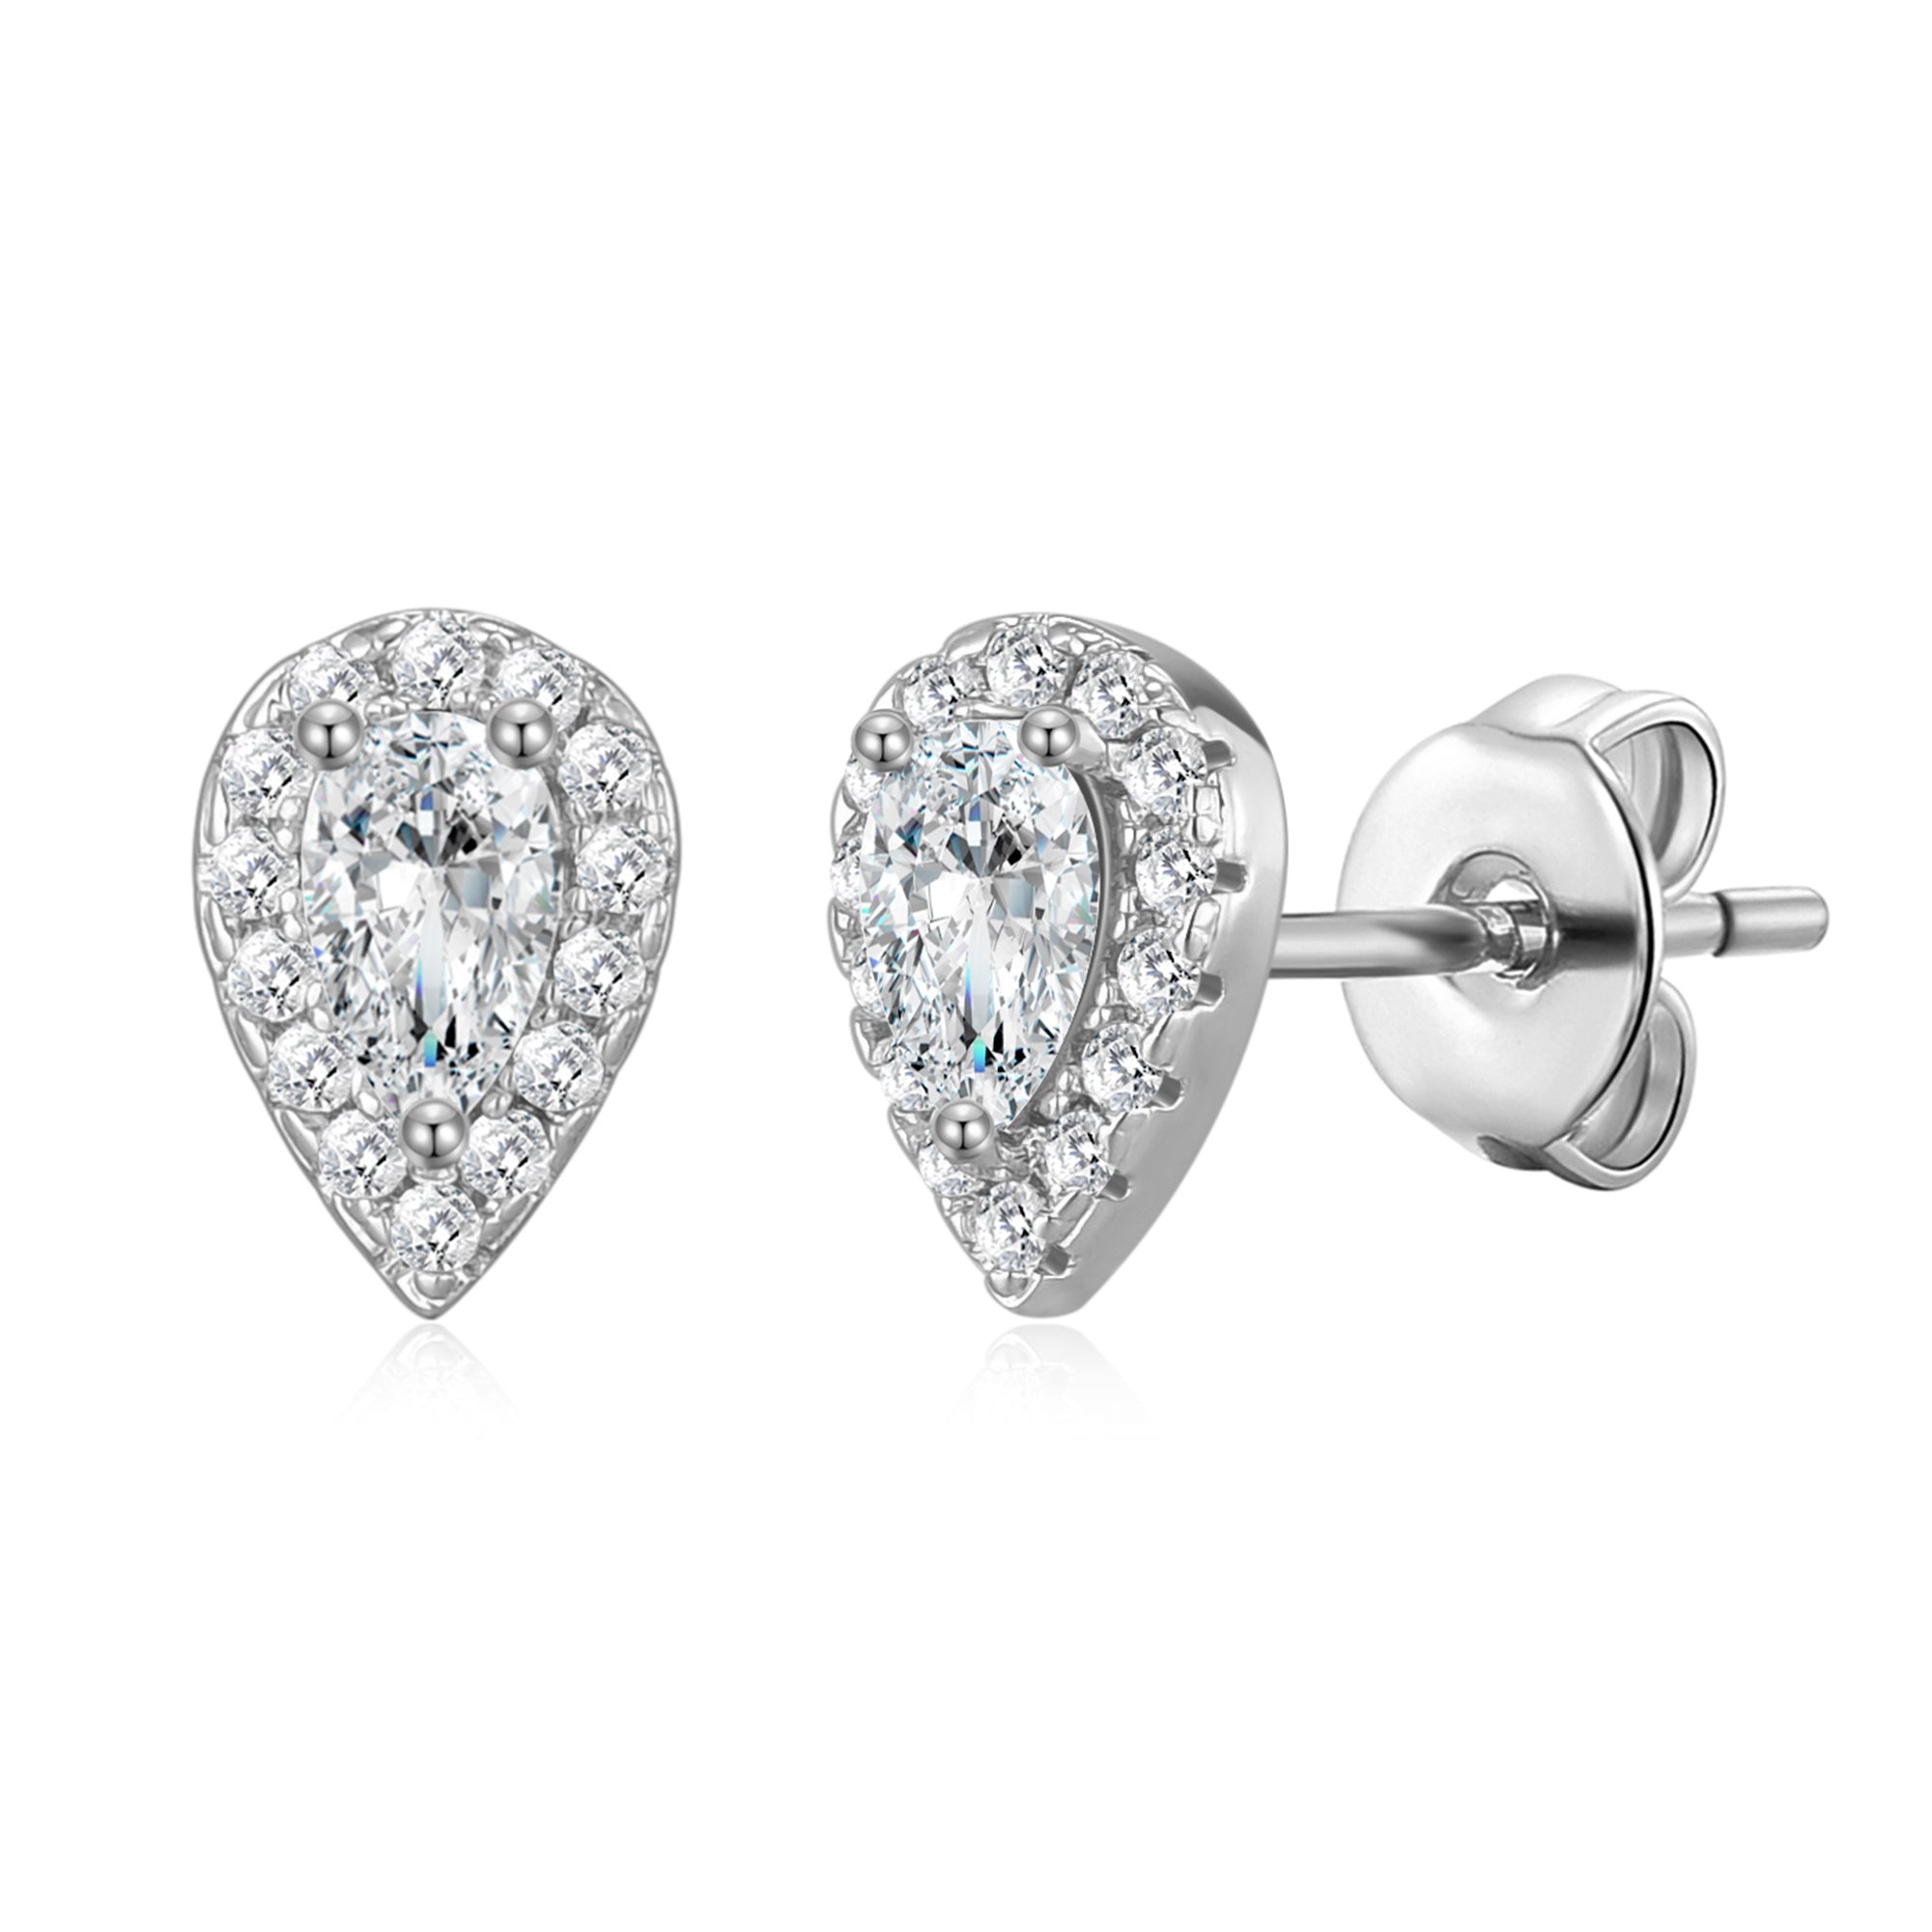 Silver Plated Pear Halo Earrings Created with Zircondia® Crystals by Philip Jones Jewellery